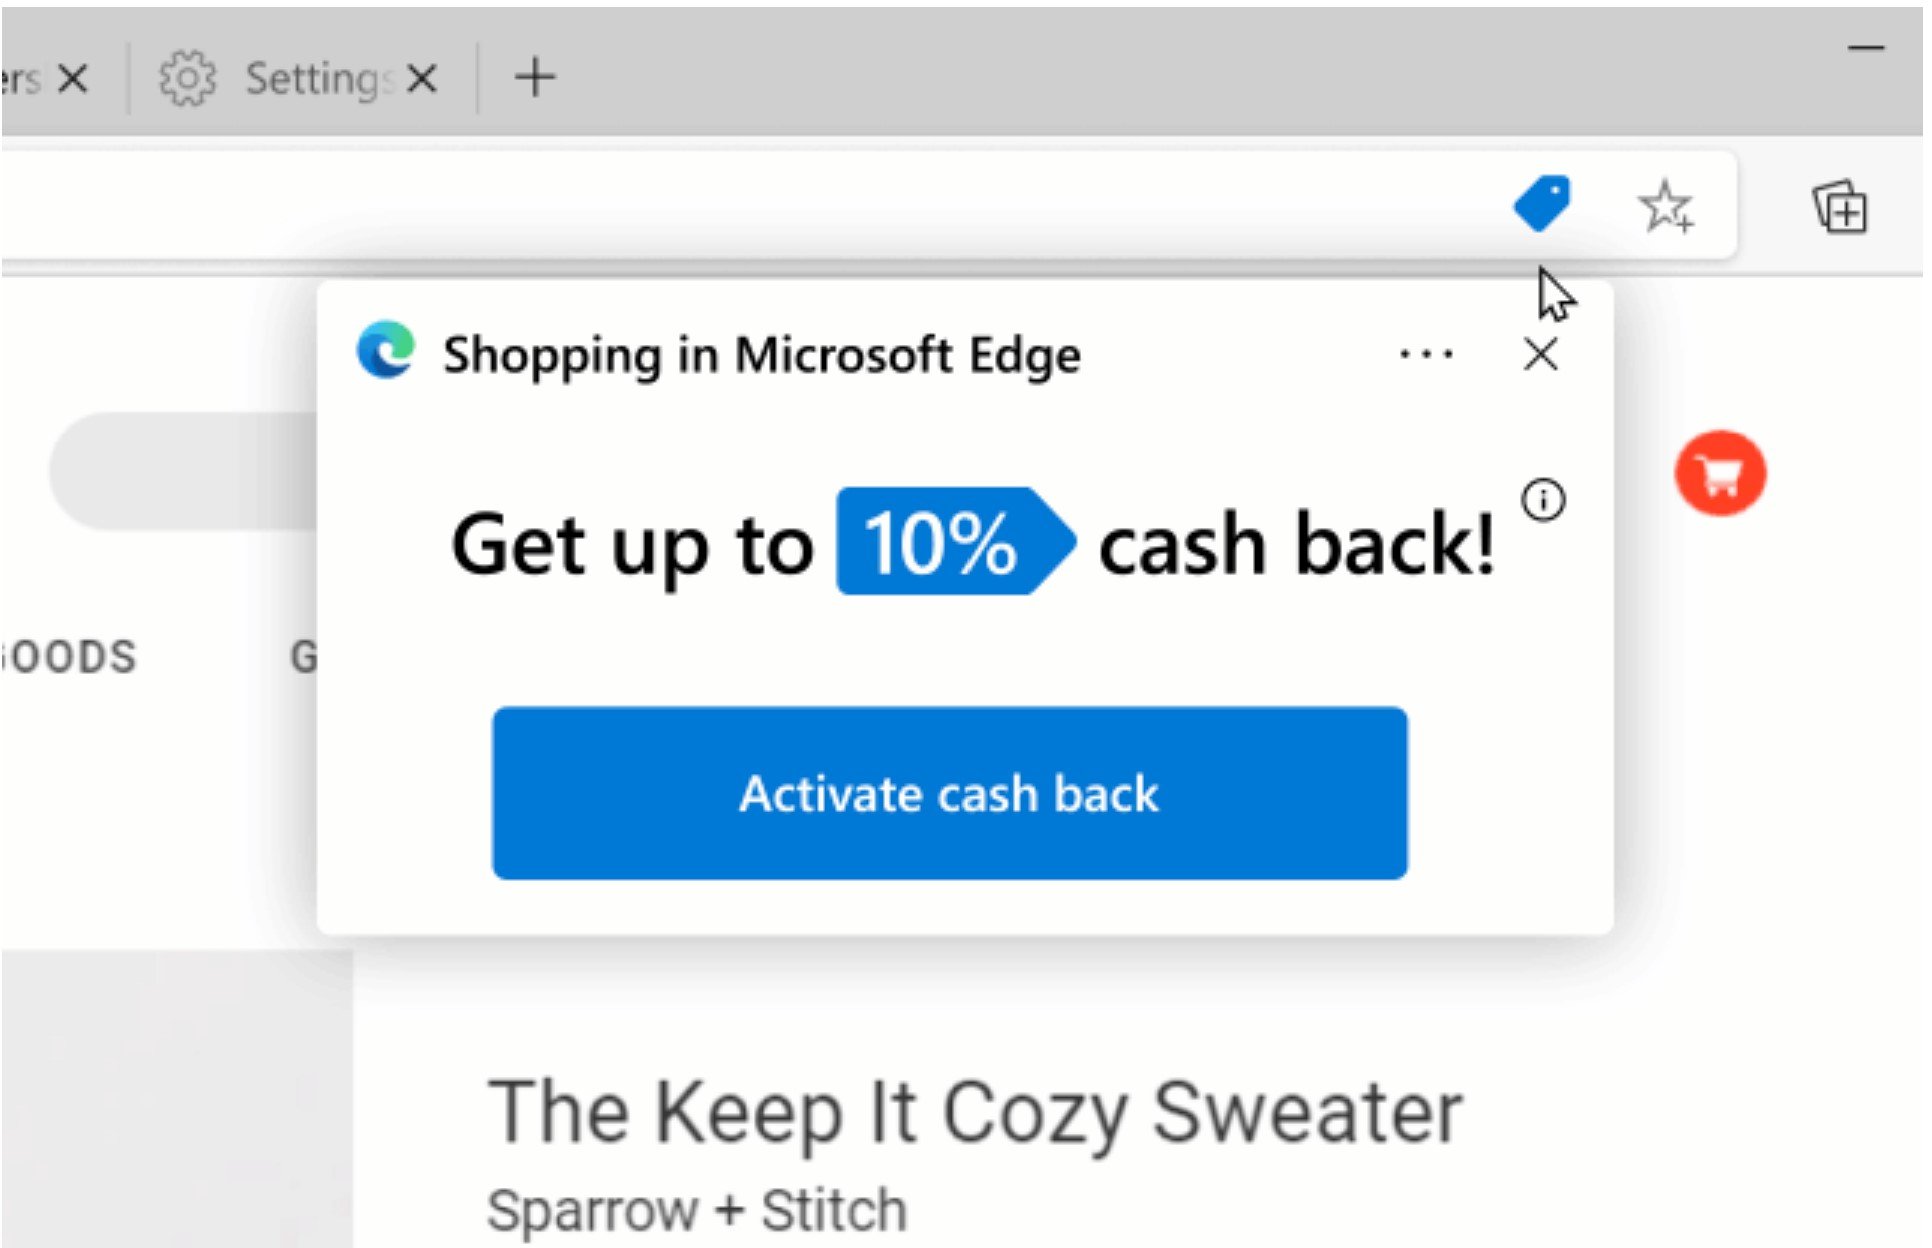 Microsoft Edge can now offer you cashback from thousands of retailers